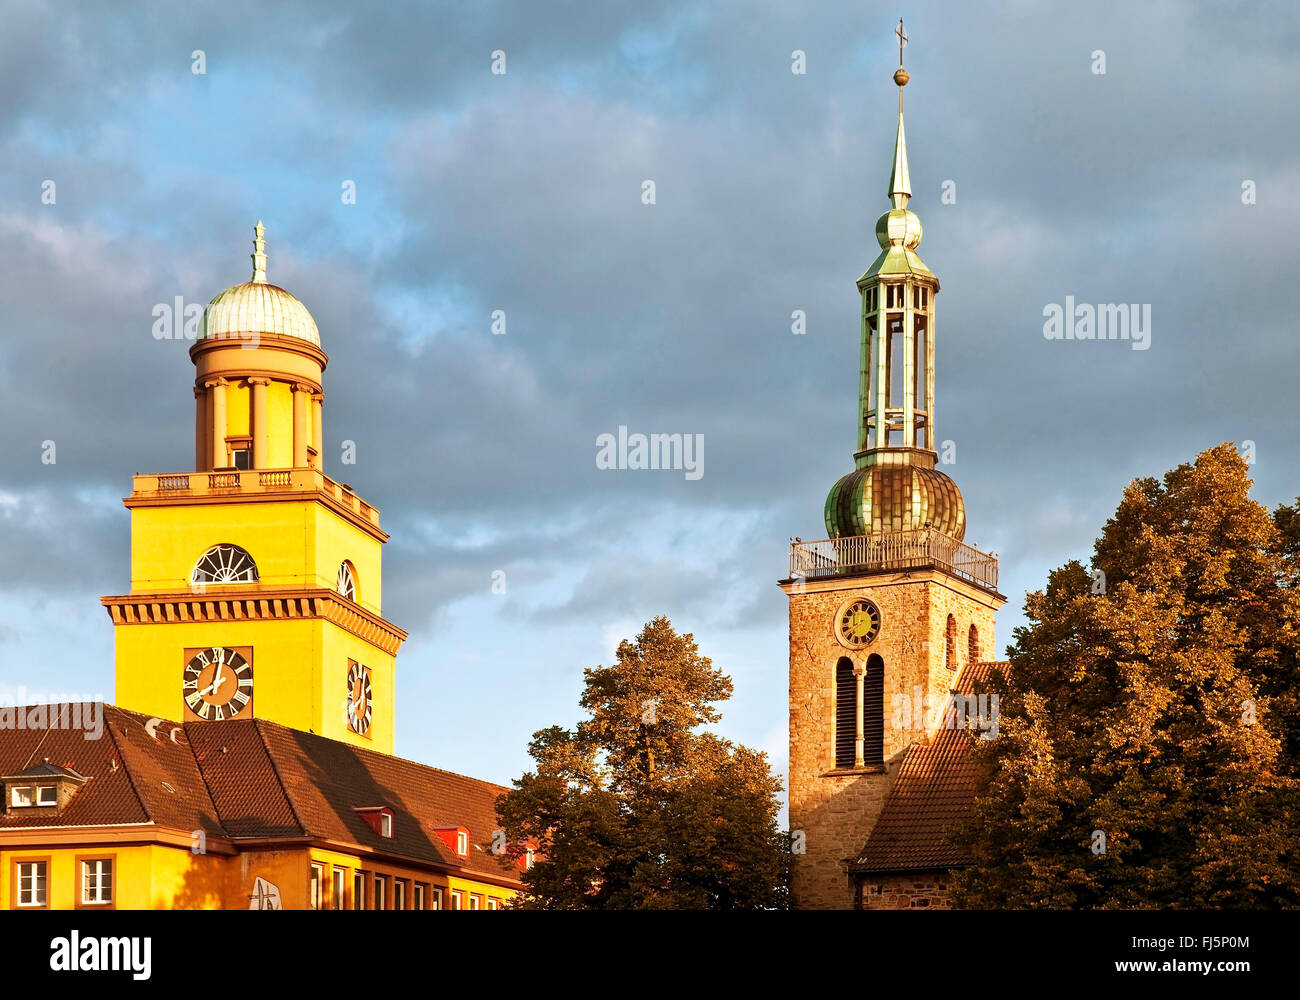 tower of the town hall and steeple of the Johannis church in Witten, Germany, North Rhine-Westphalia, Ruhr Area, Witten Stock Photo